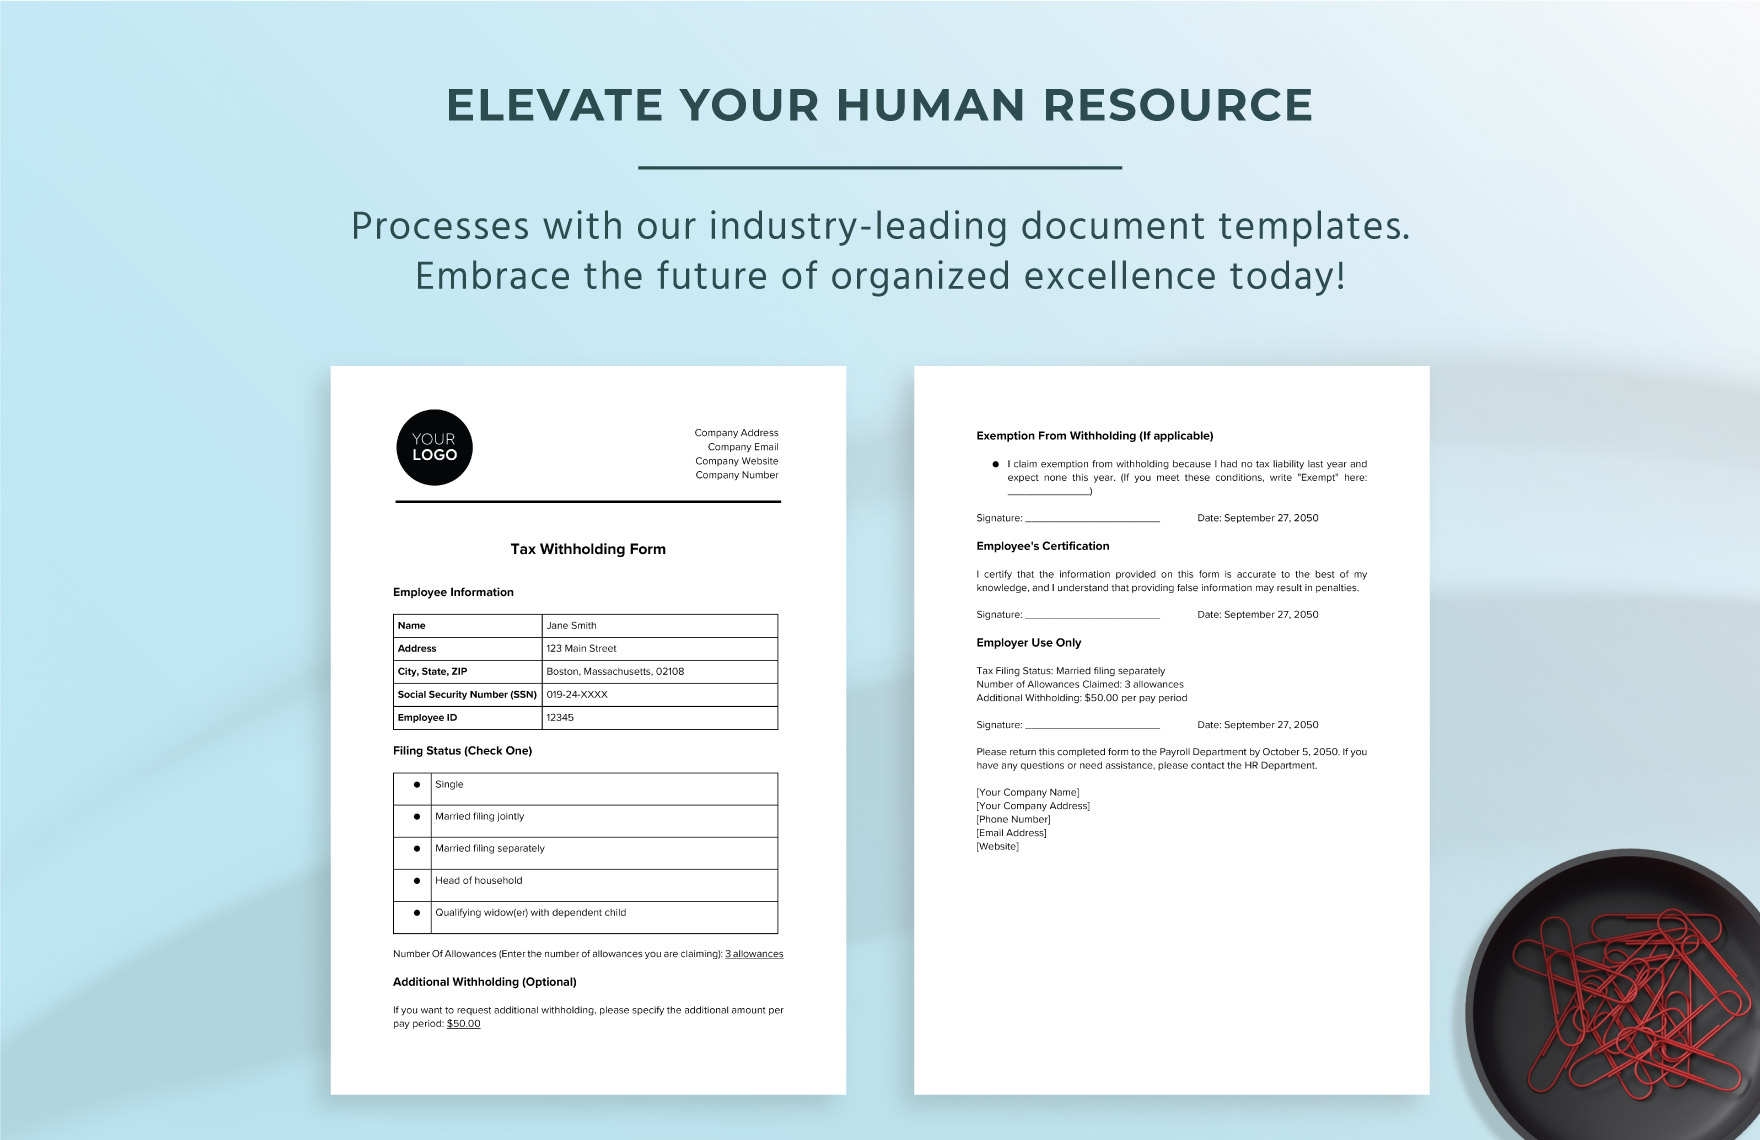 Tax Withholding Form HR Template